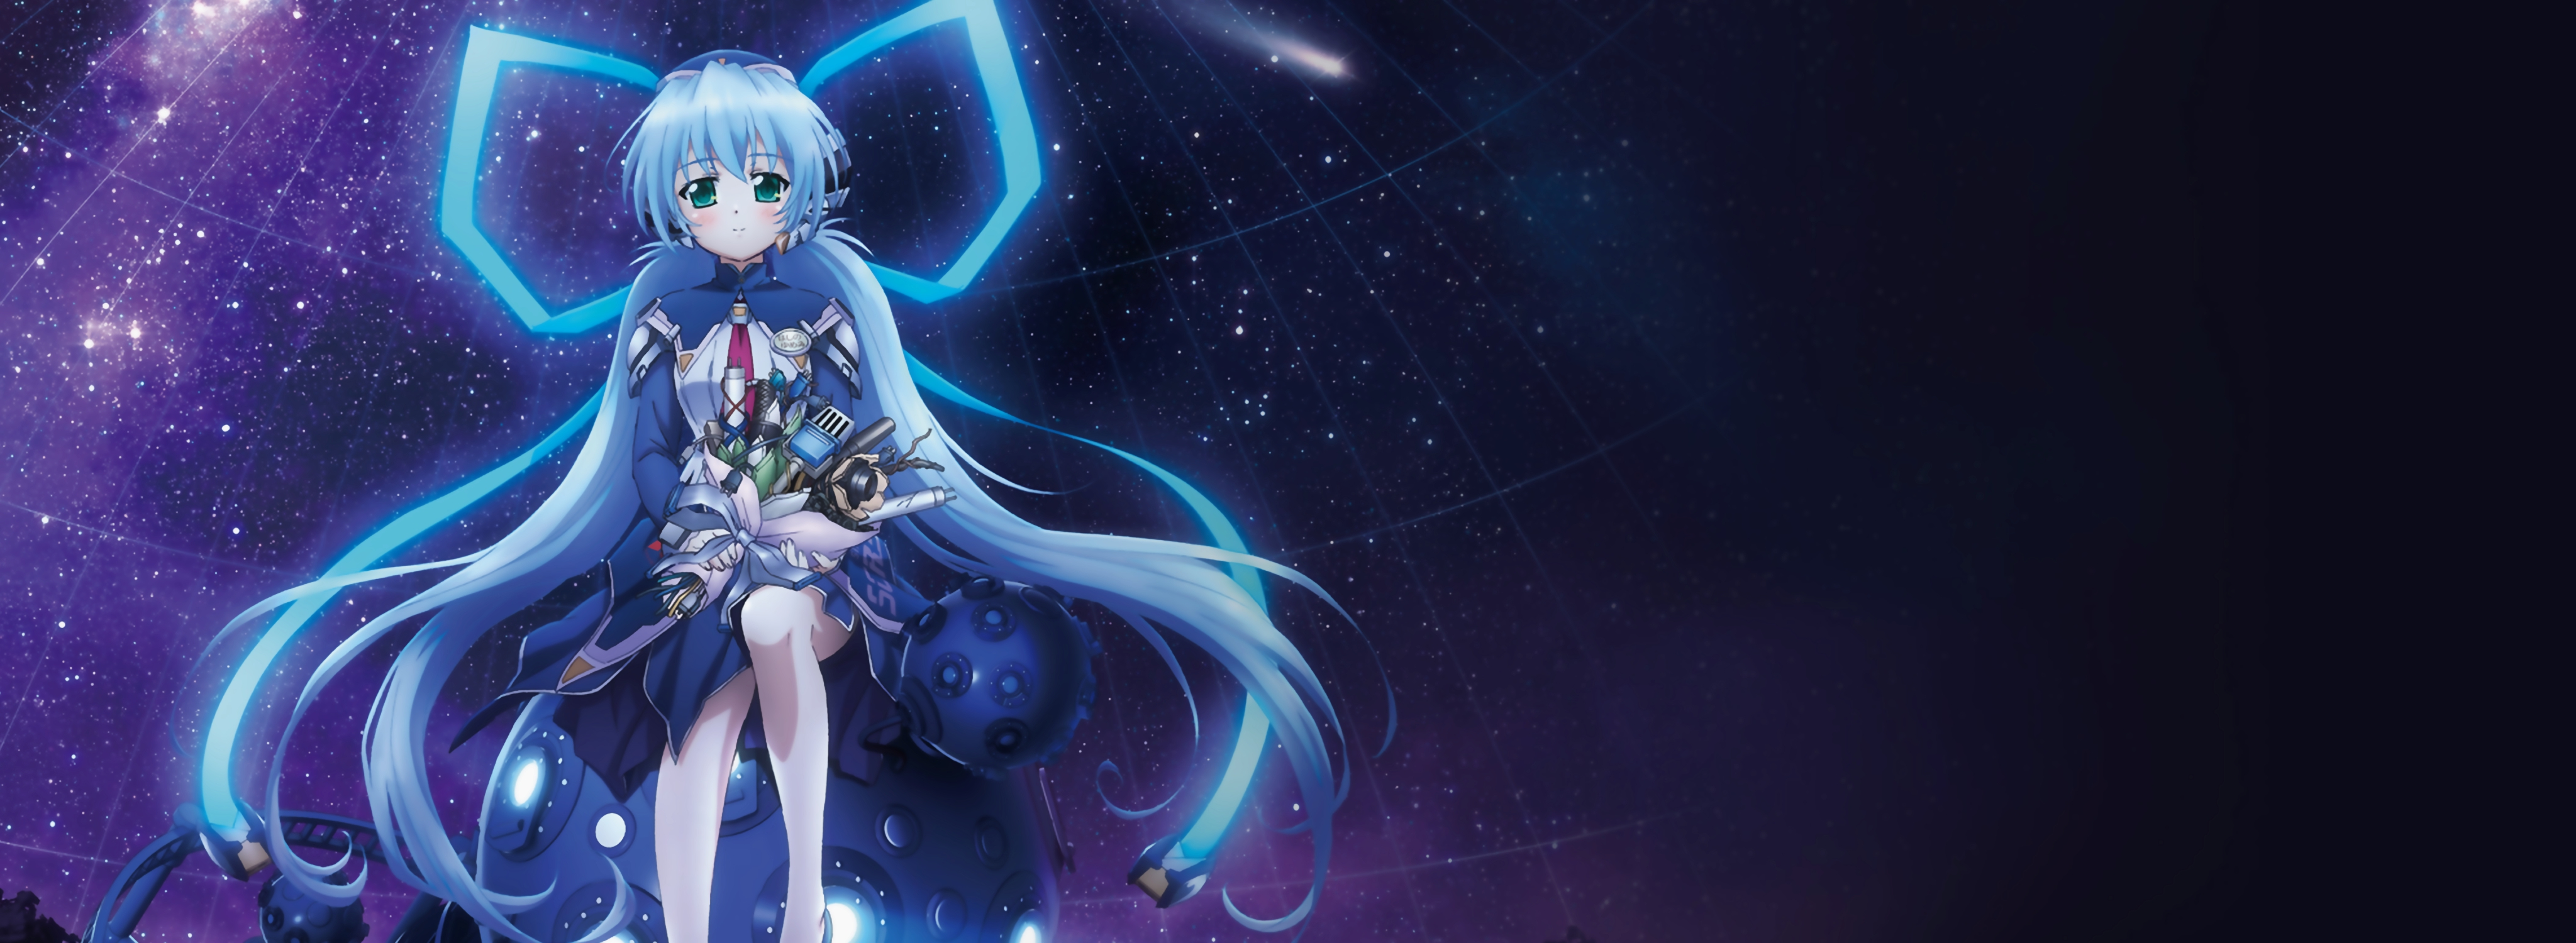 Anime Planetarian: The Reverie of a Little Planet HD Wallpaper